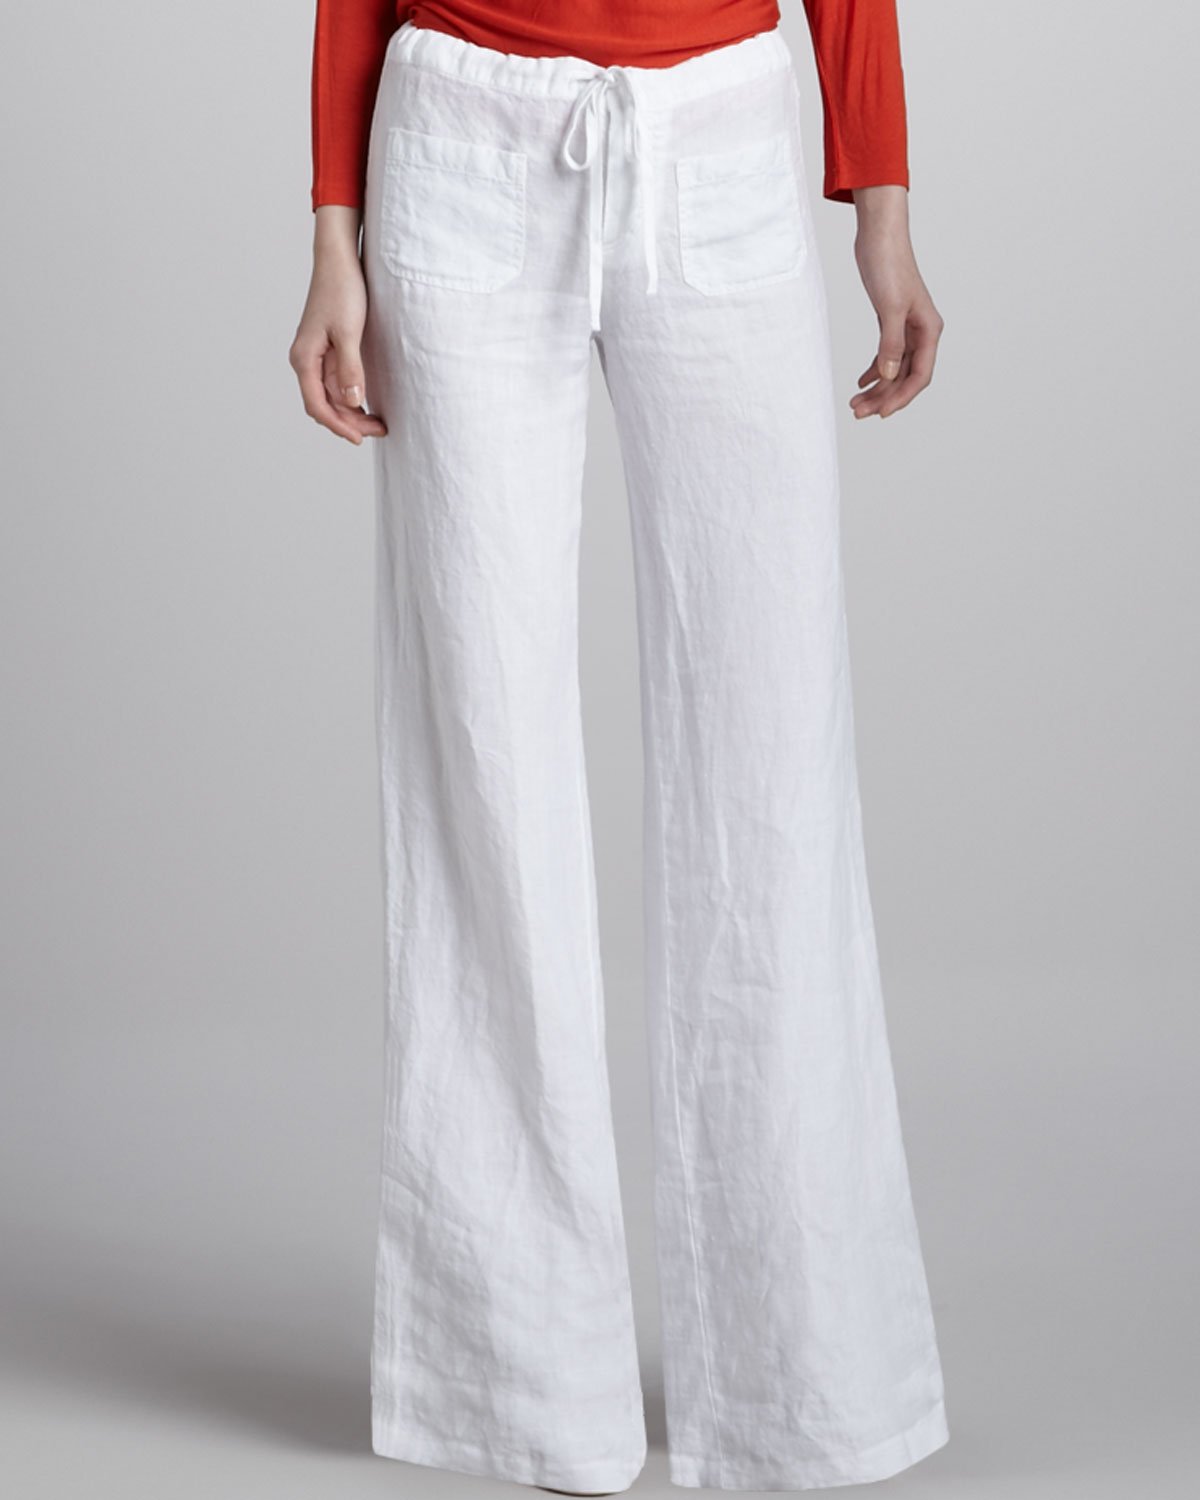 Lyst - Vince Linen Draw-string Beach Pants in White